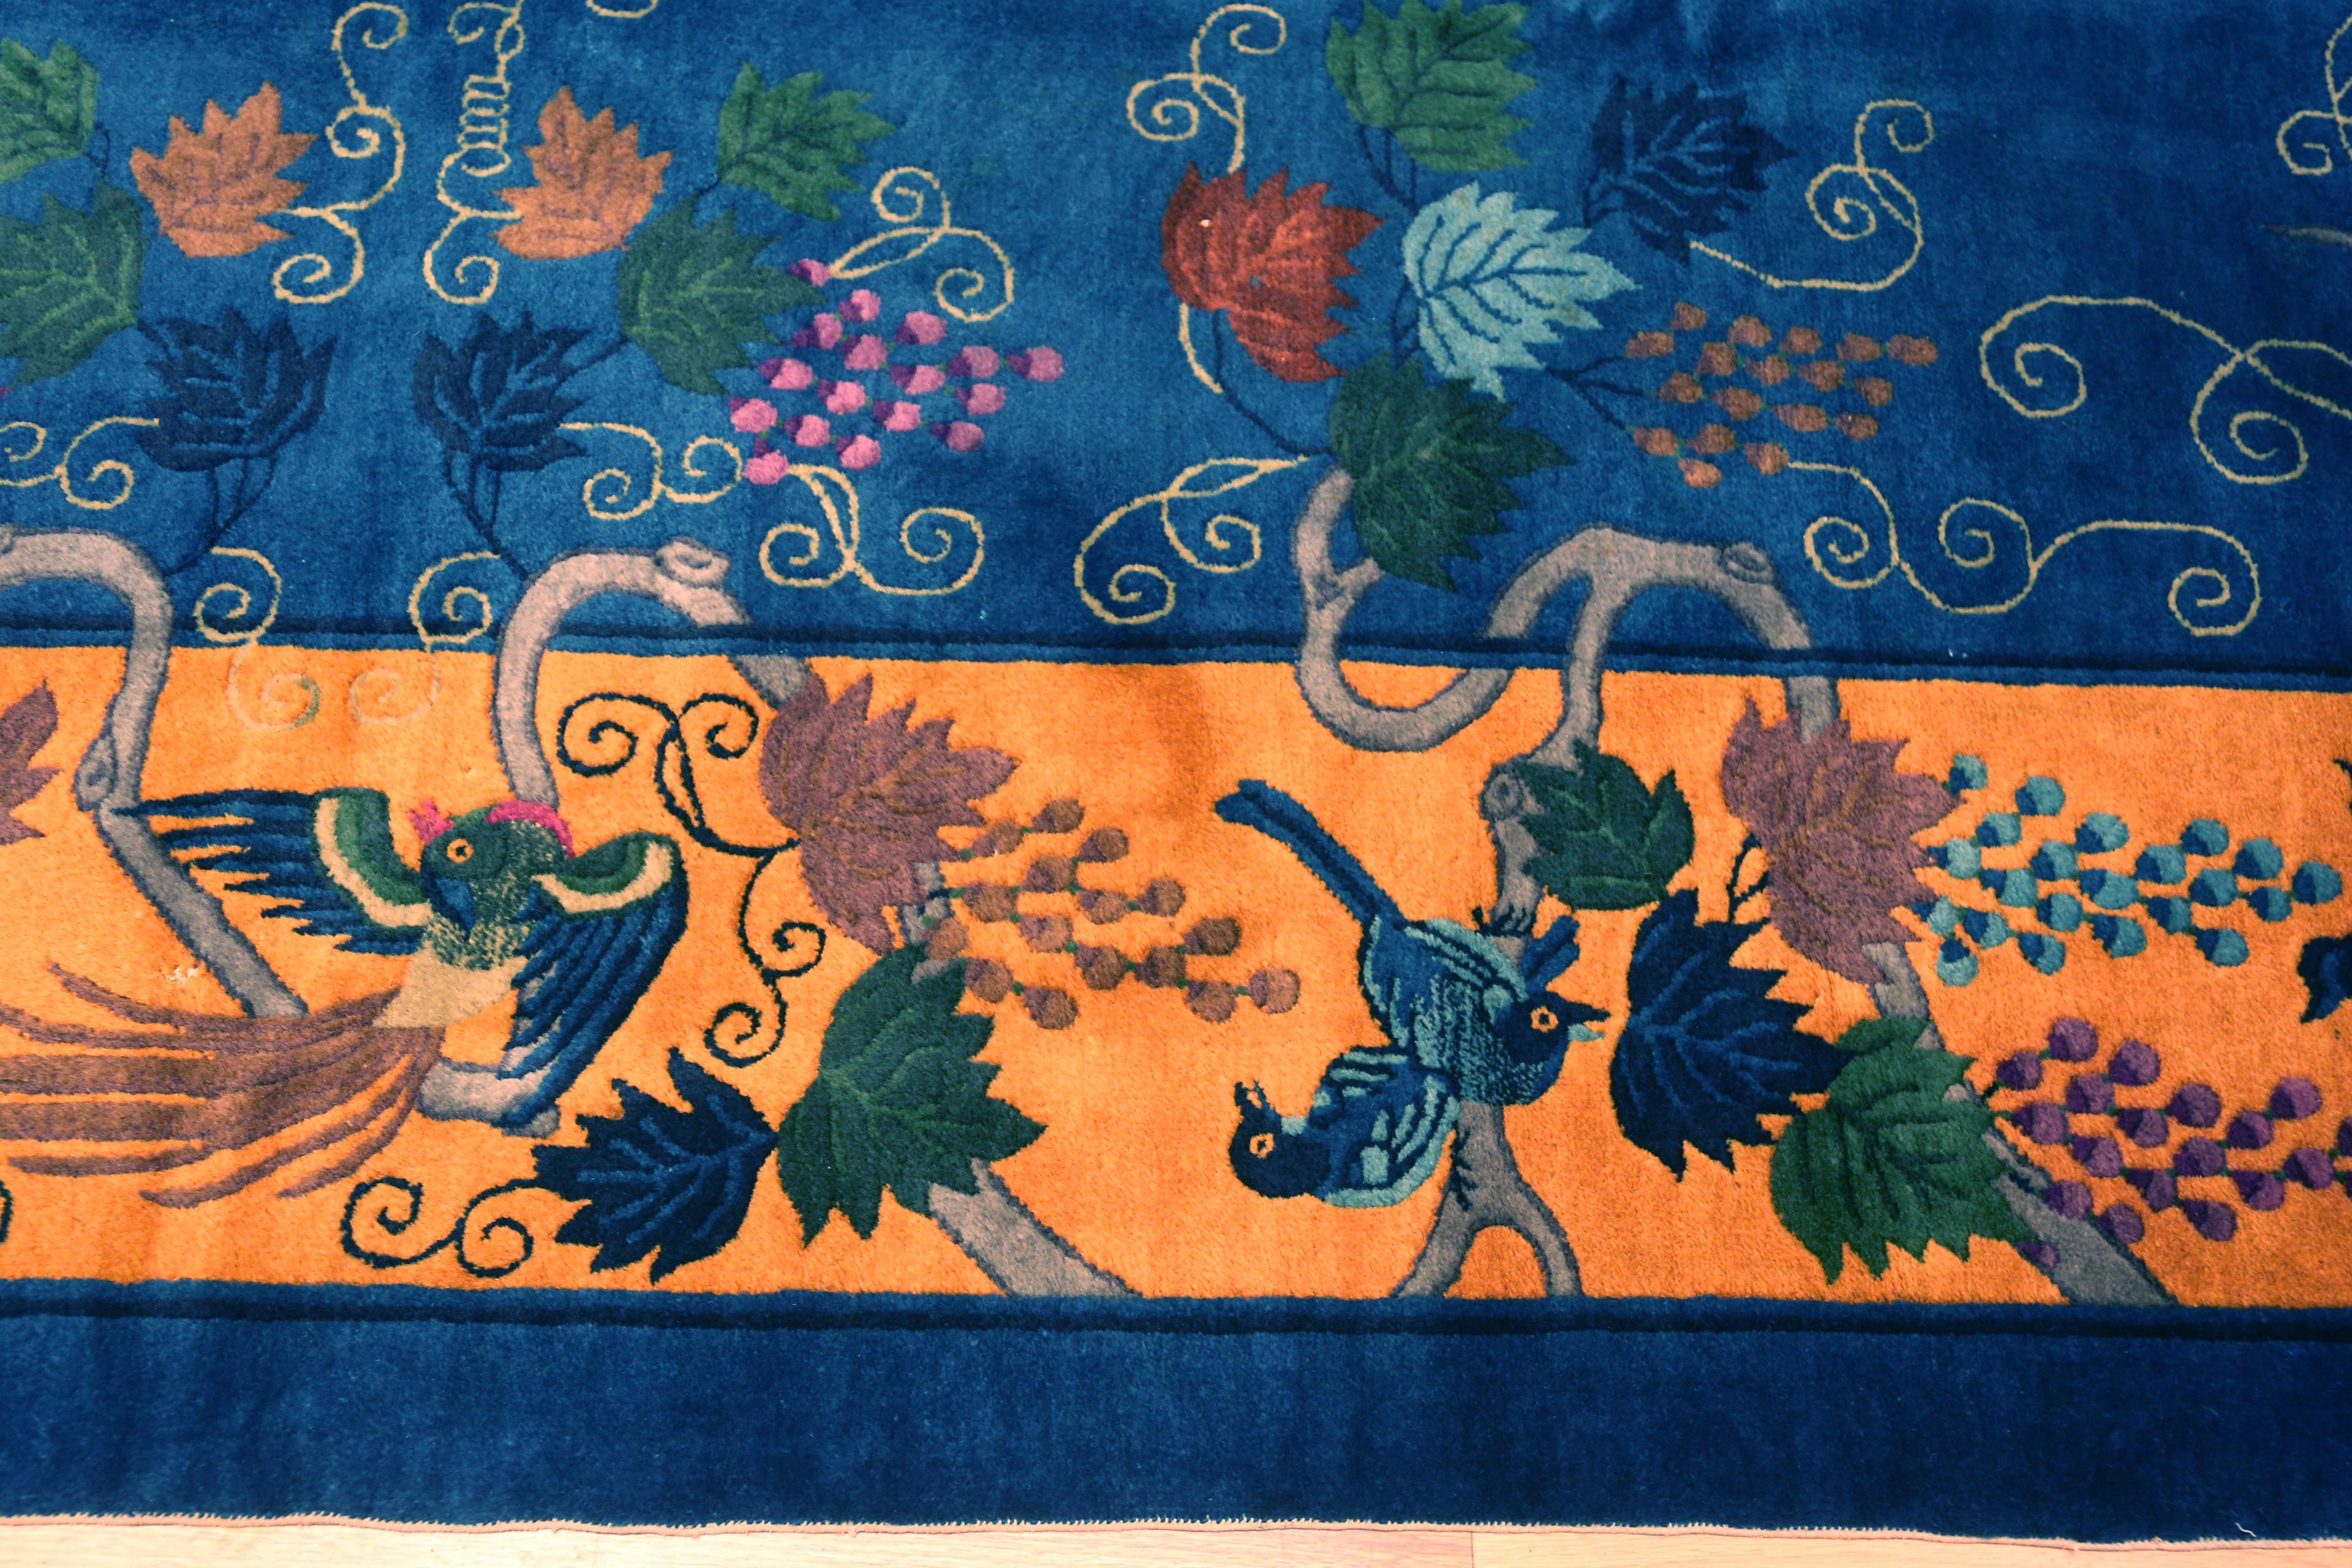 Eclectic Colorful Antique Chinese Art Deco Peacock Rug 10' x 12'1